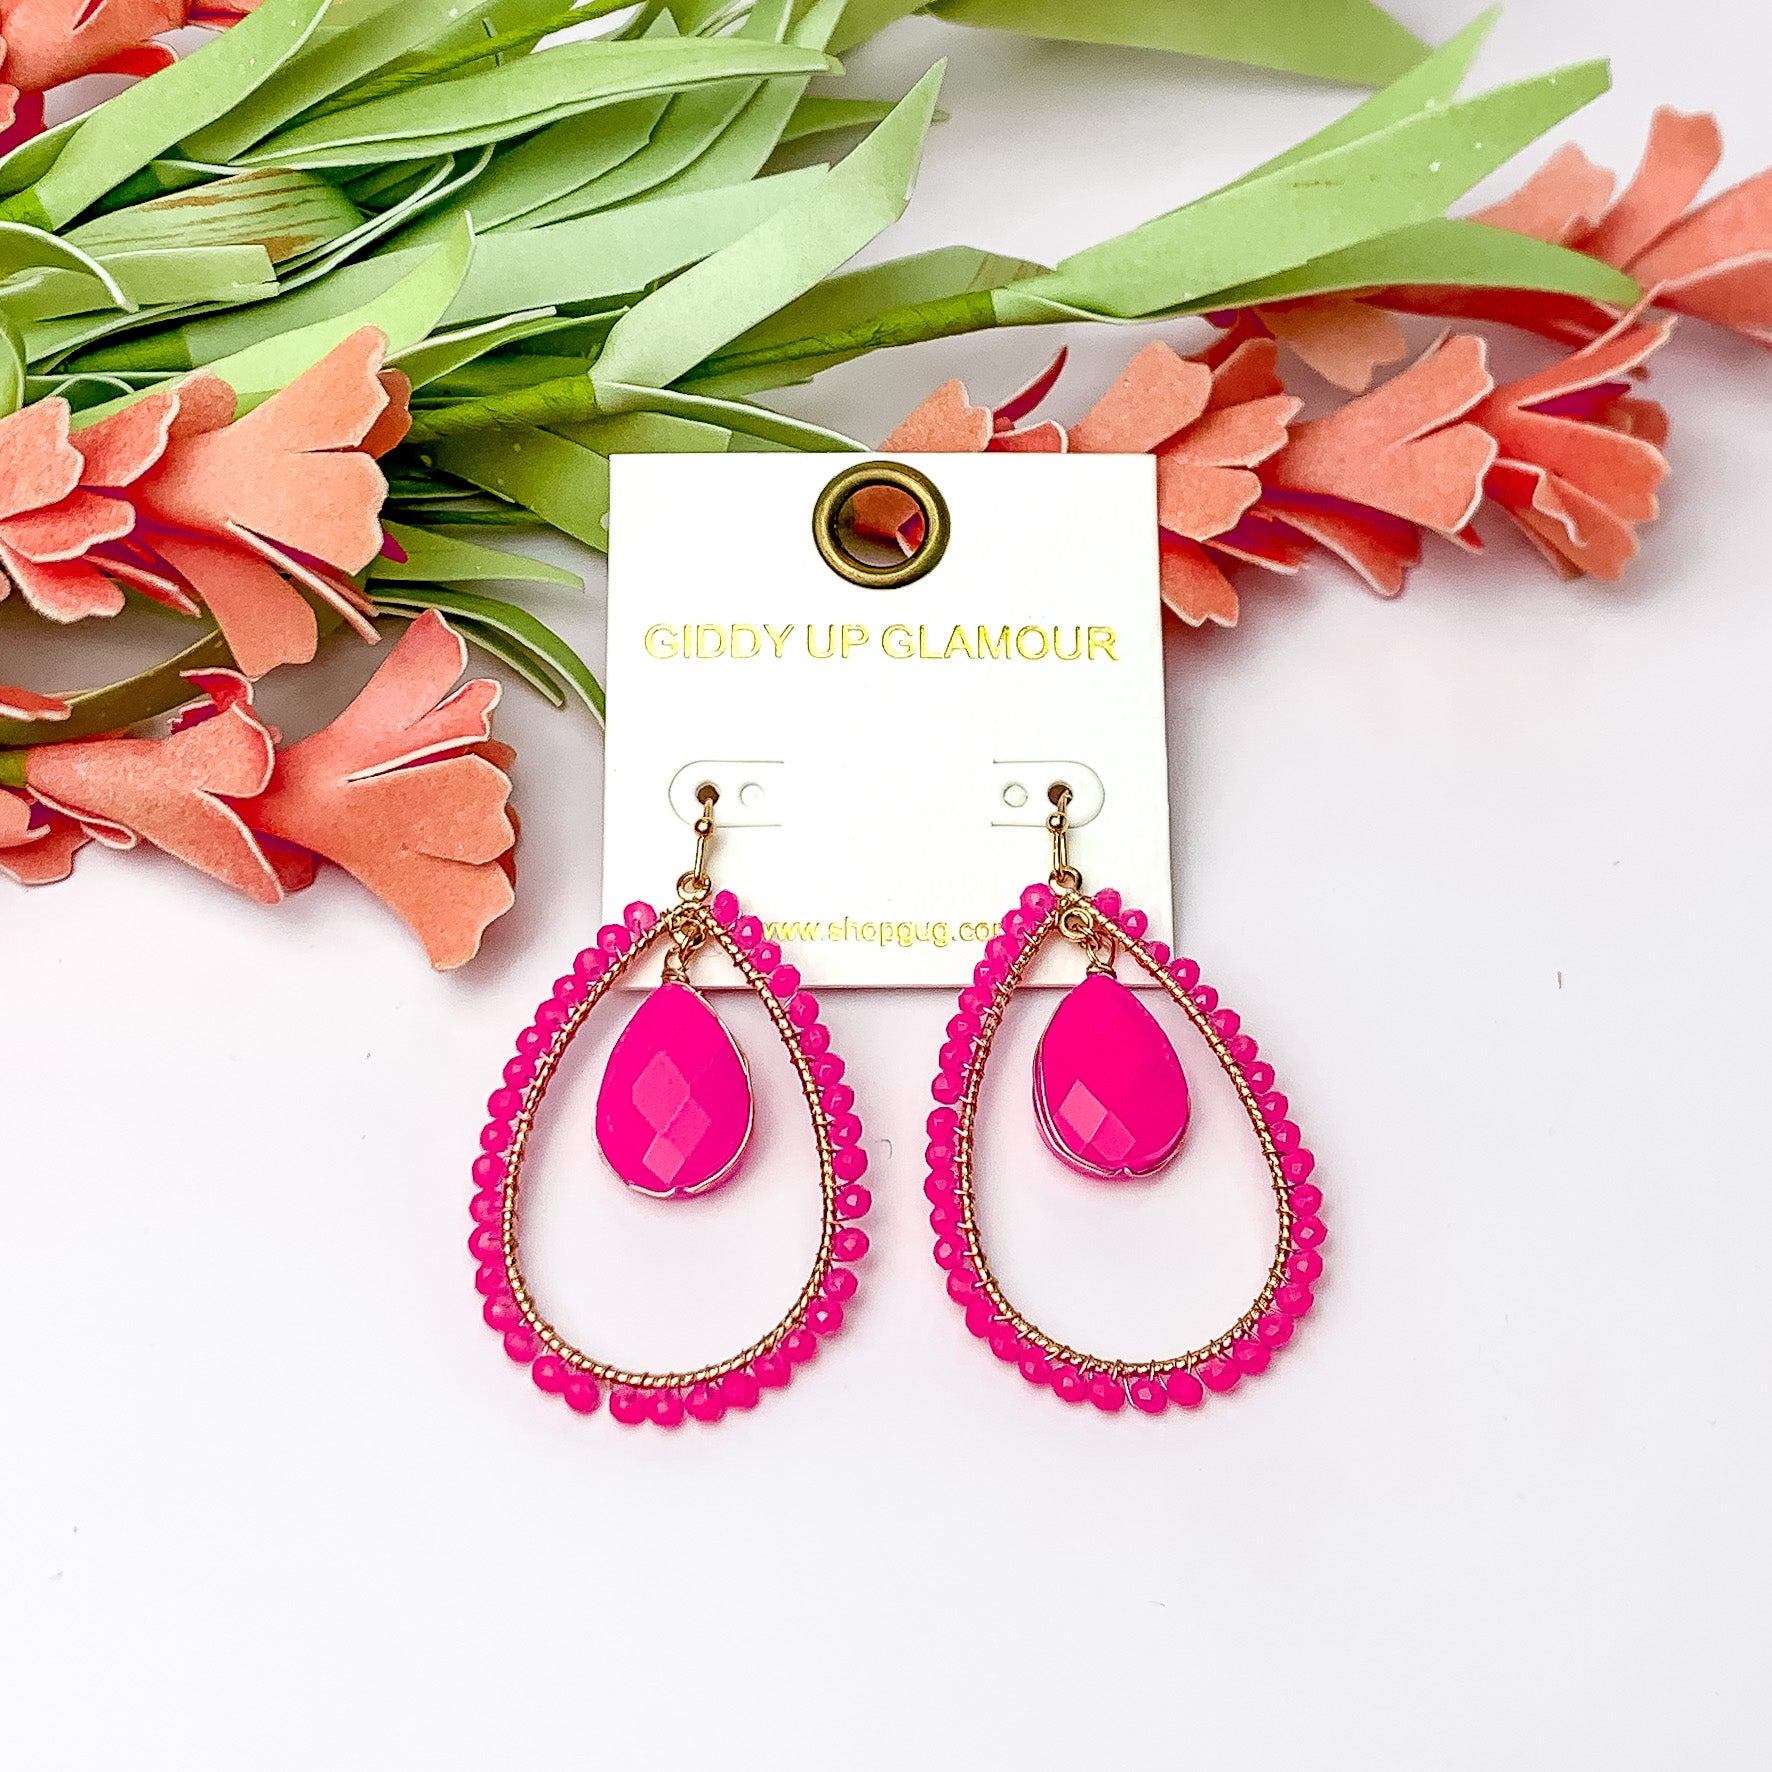 Pink Stone Inside Open Beaded Teardrop Earrings with Gold Tone Outline. Pictured on a white background with flowers at the top.